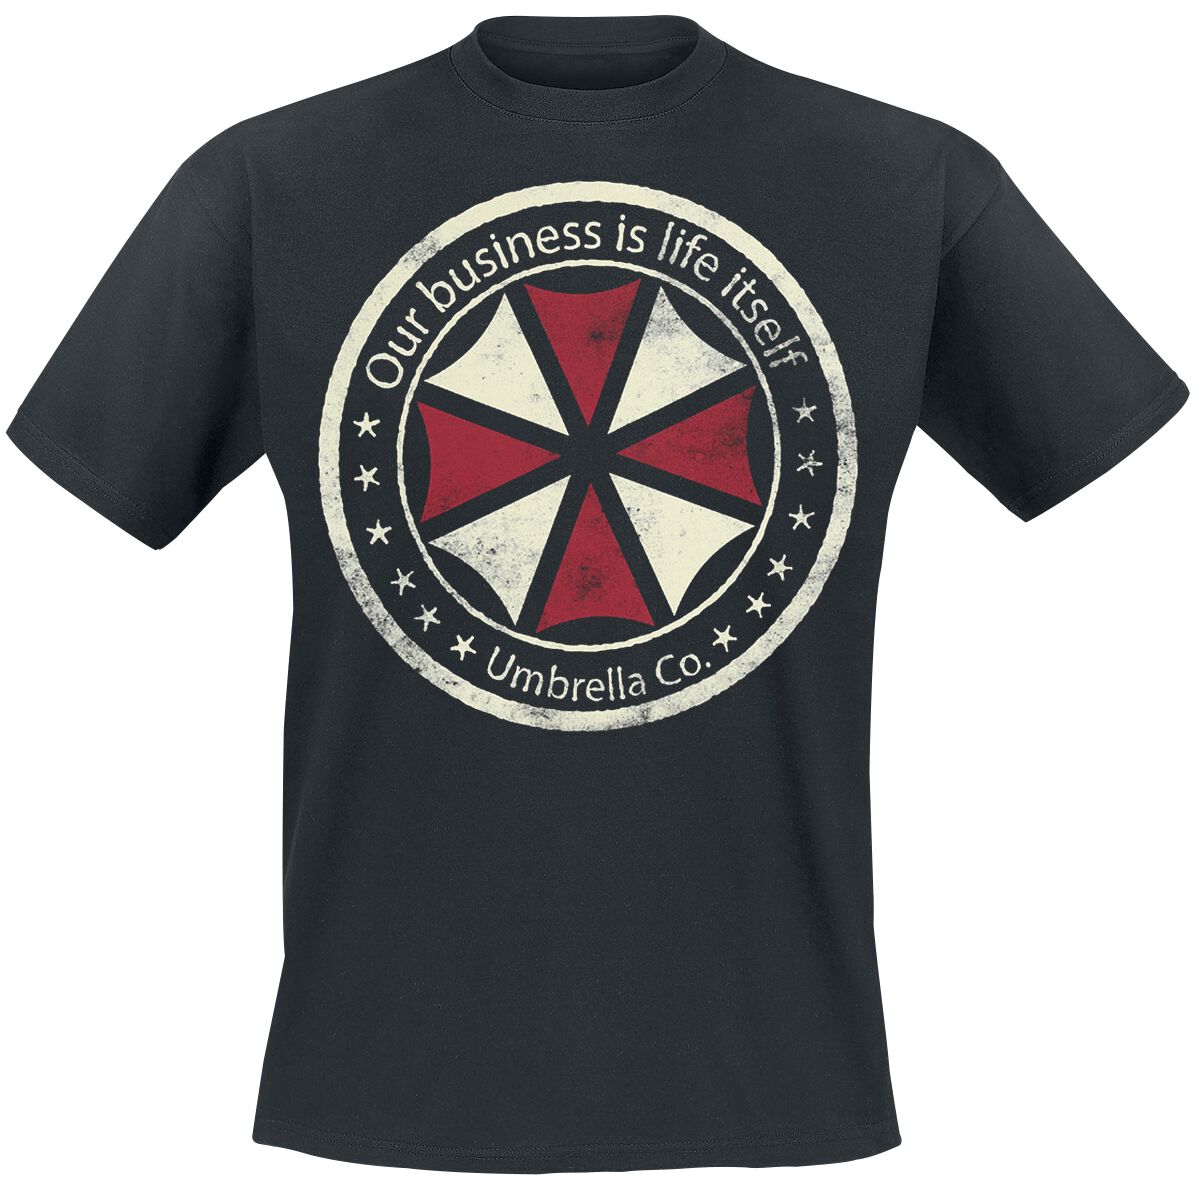 Resident Evil Umbrella Co. - Our Business Is Life Itself T-Shirt schwarz